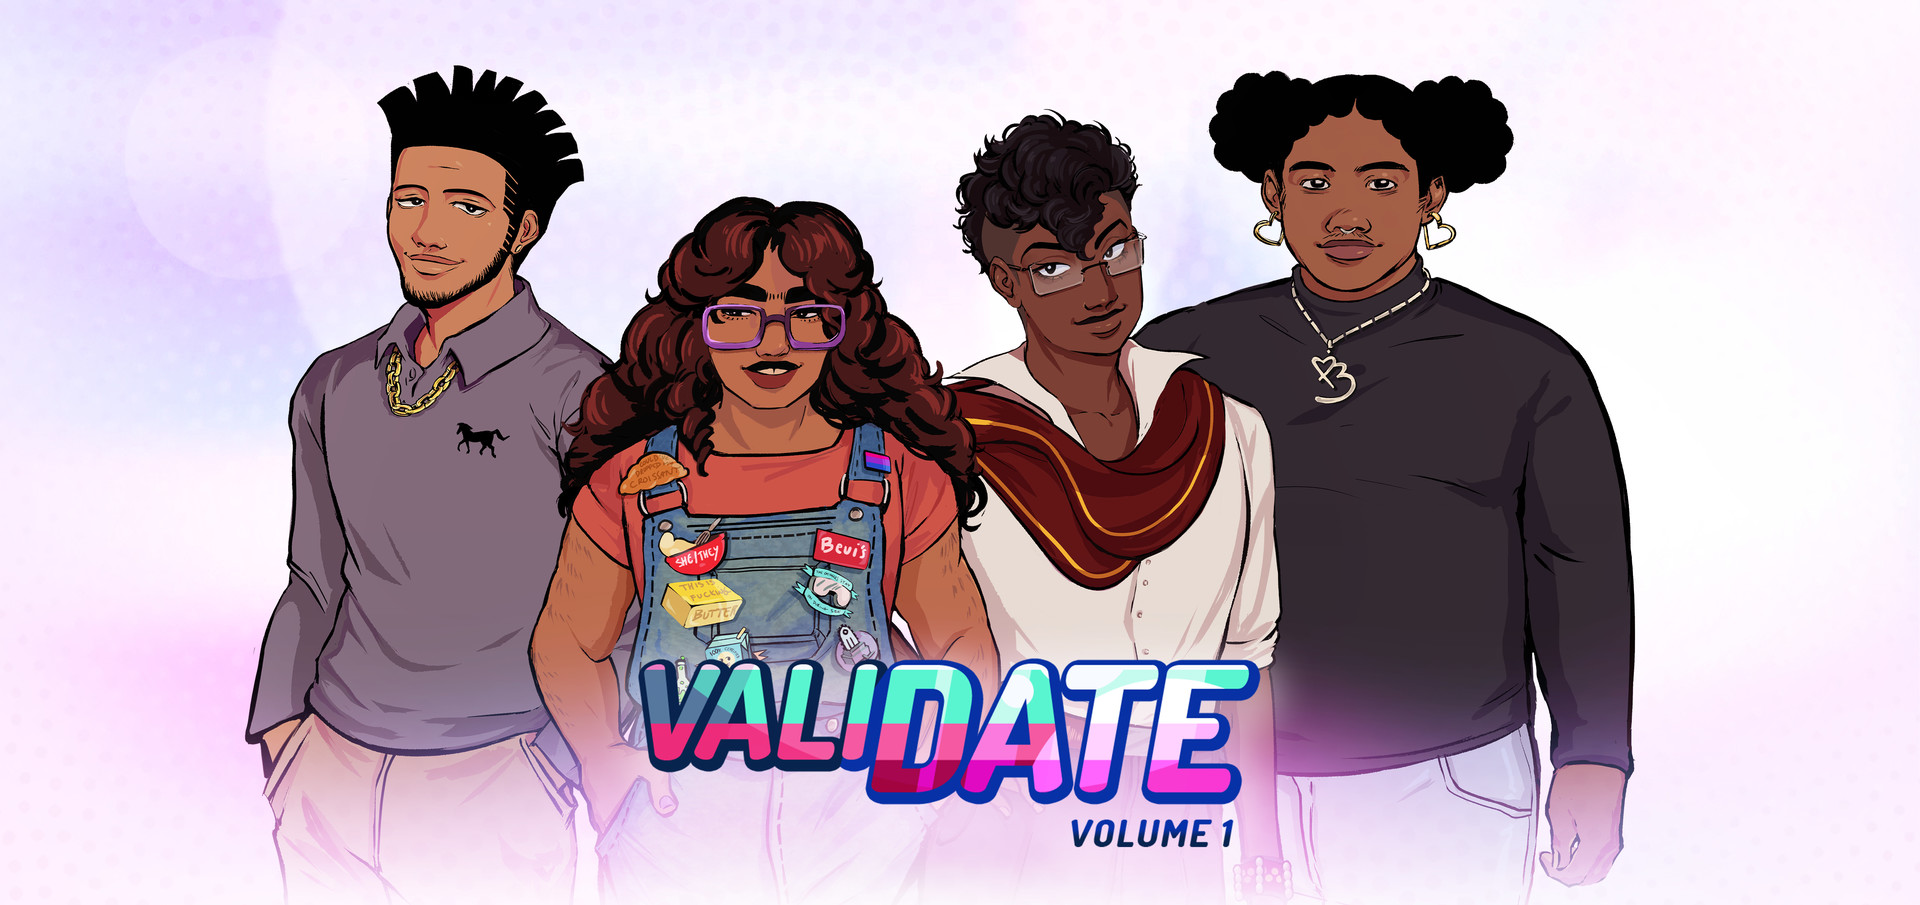 Validate game. Validate игра. Романы по инди играм. Validate игра Скриншоты. Validate: struggling Singles in your area.